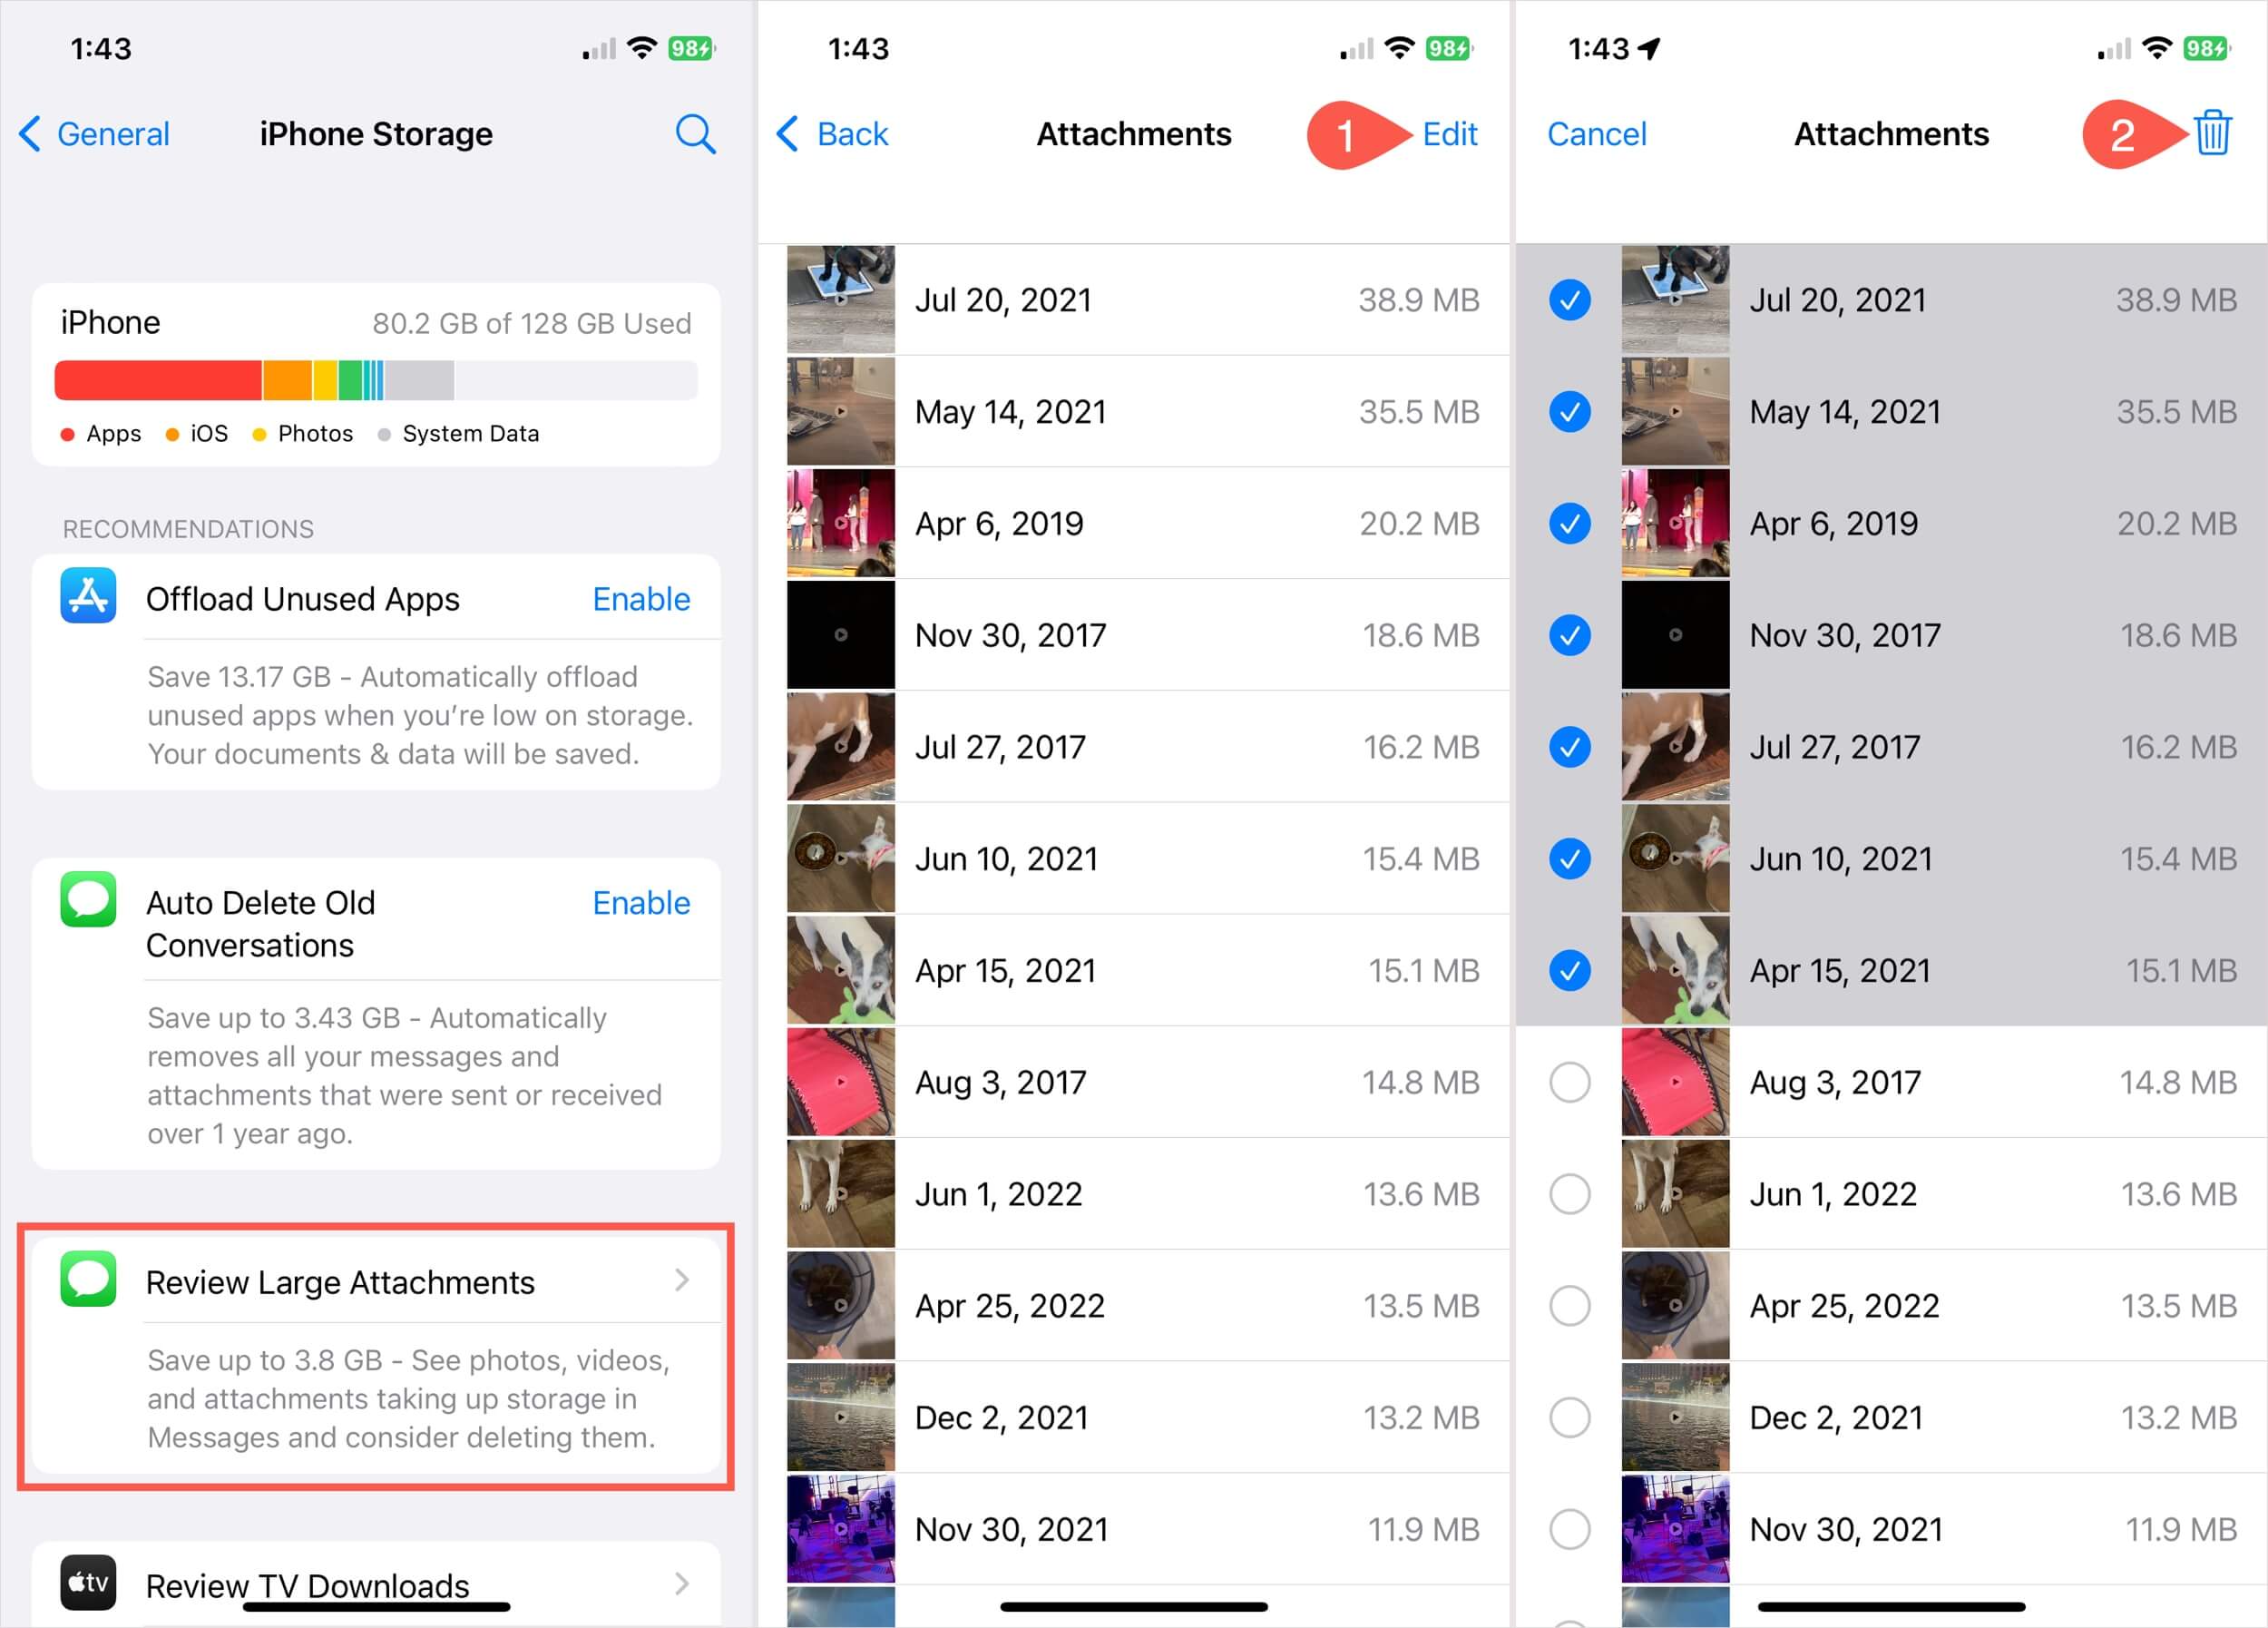 Review Large Attachments in iPhone Storage